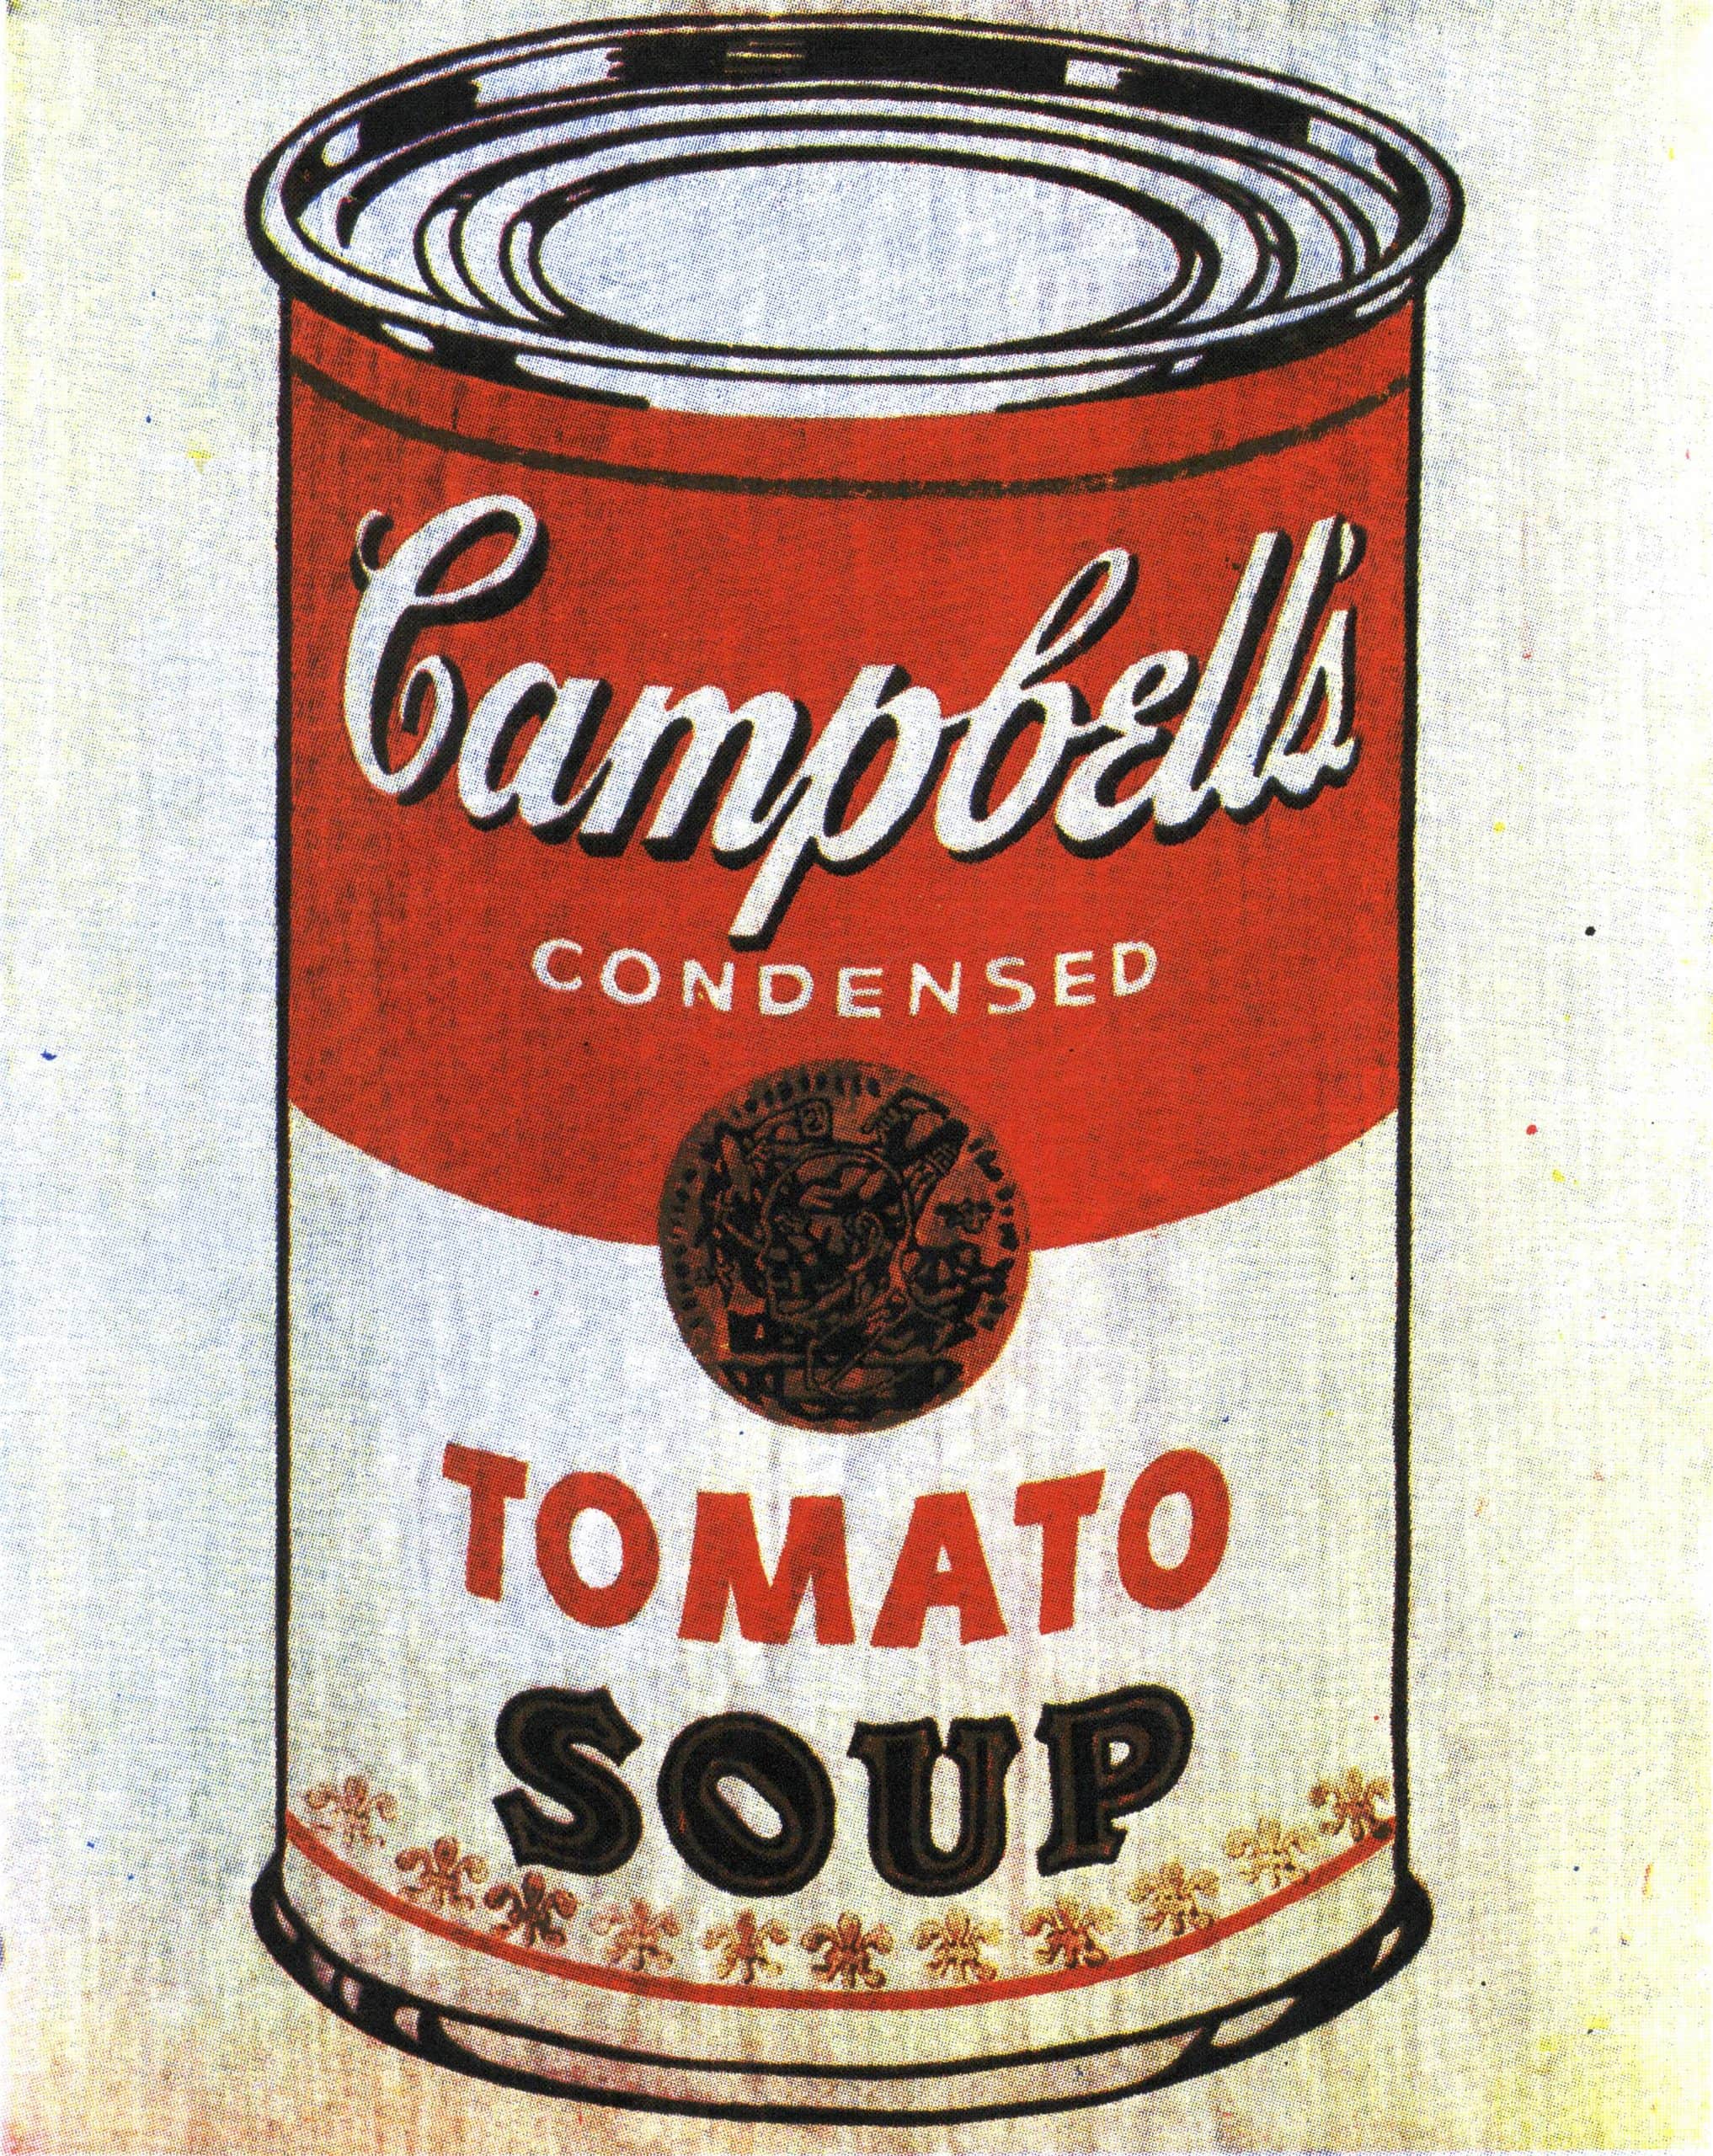 Andy Warhol (American, 1928–1987). Campbell’s Soup Cans (detail). 1962. Synthetic polymer paint on 32 canvases, each 20 x 16″ (50.8 x 40.6 cm)